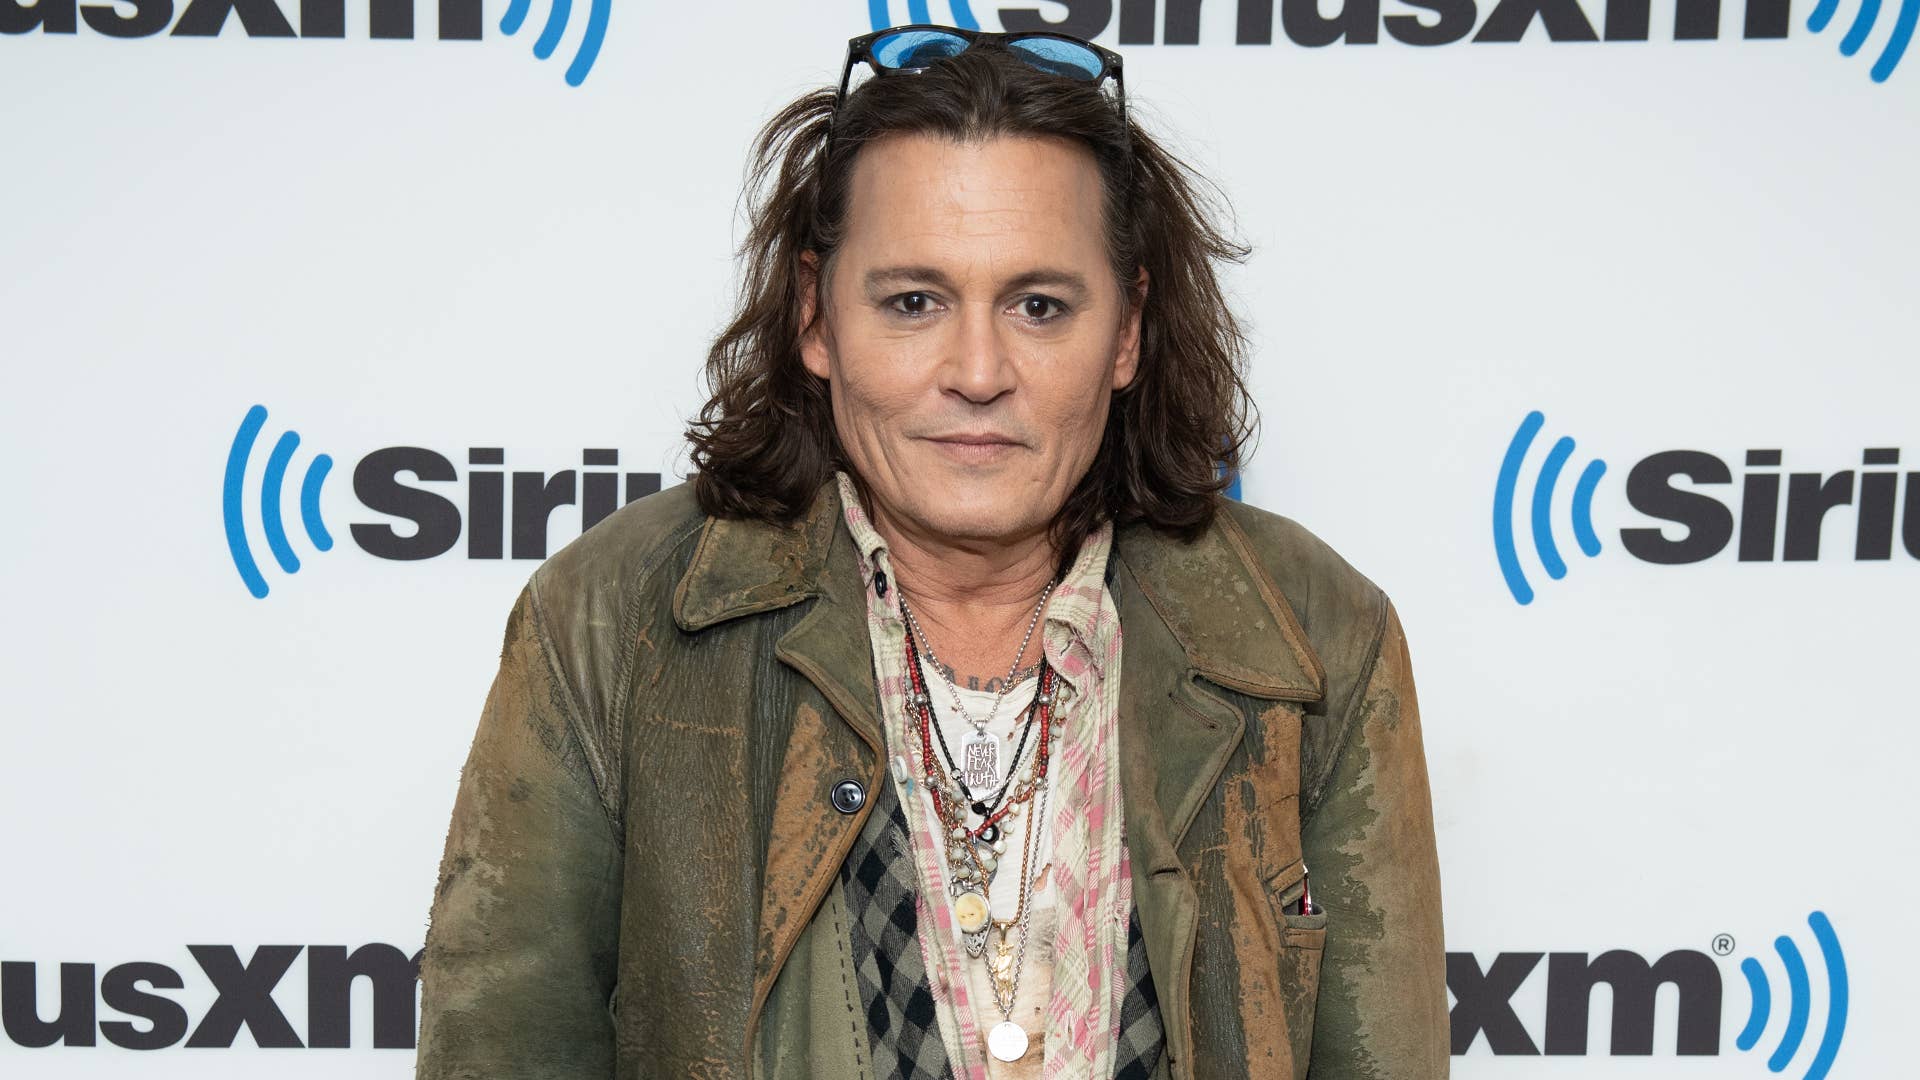 Johnny Depp is pictured at SiriusXM studios